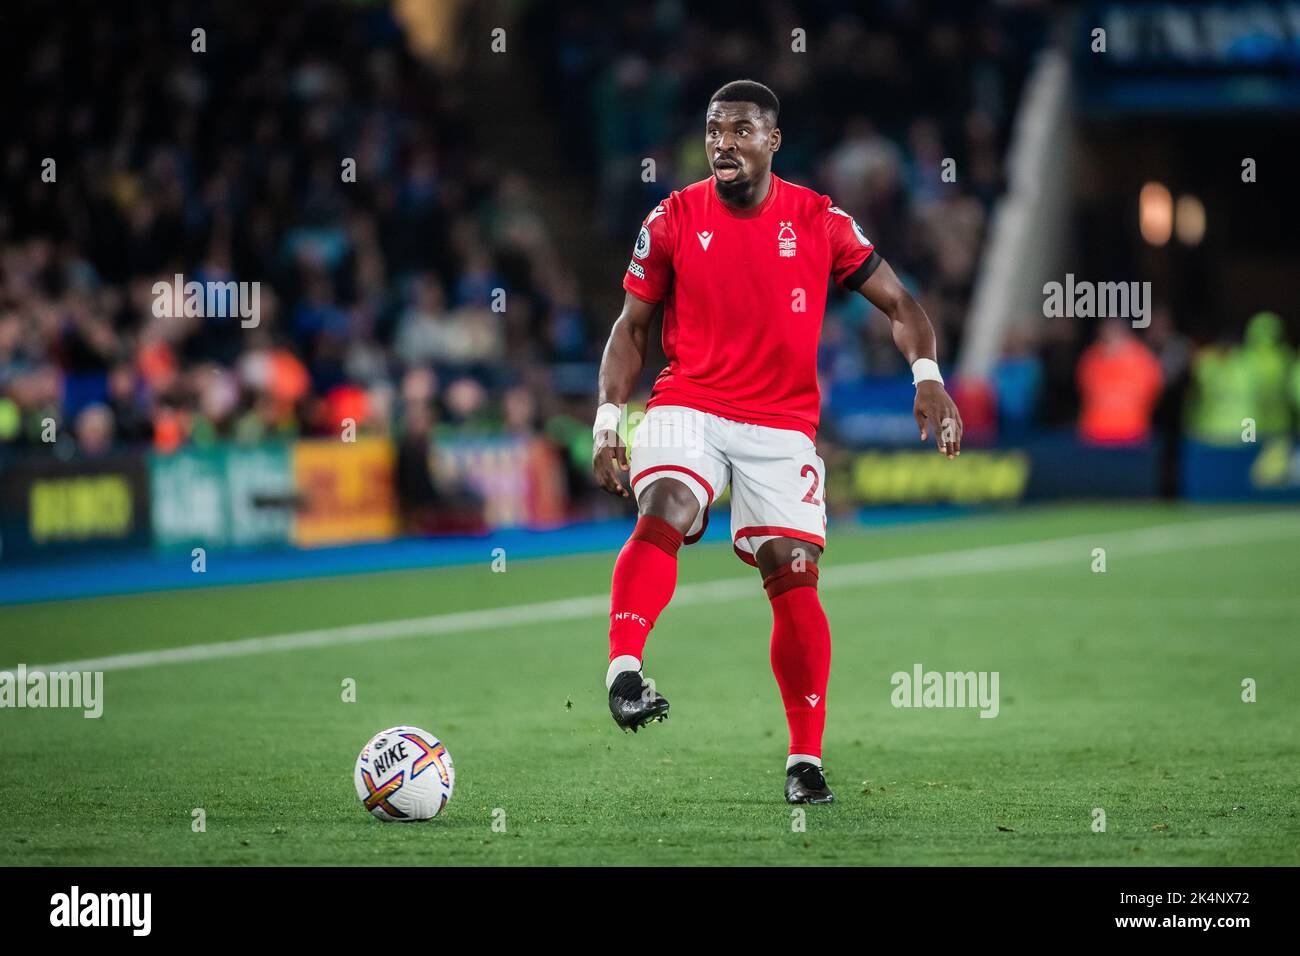 Serge Aurier #24 of Nottingham Forest passes the ball during the Premier League match Leicester City vs Nottingham Forest at King Power Stadium, Leicester, United Kingdom, 3rd October 2022  (Photo by Ritchie Sumpter/News Images) Stock Photo